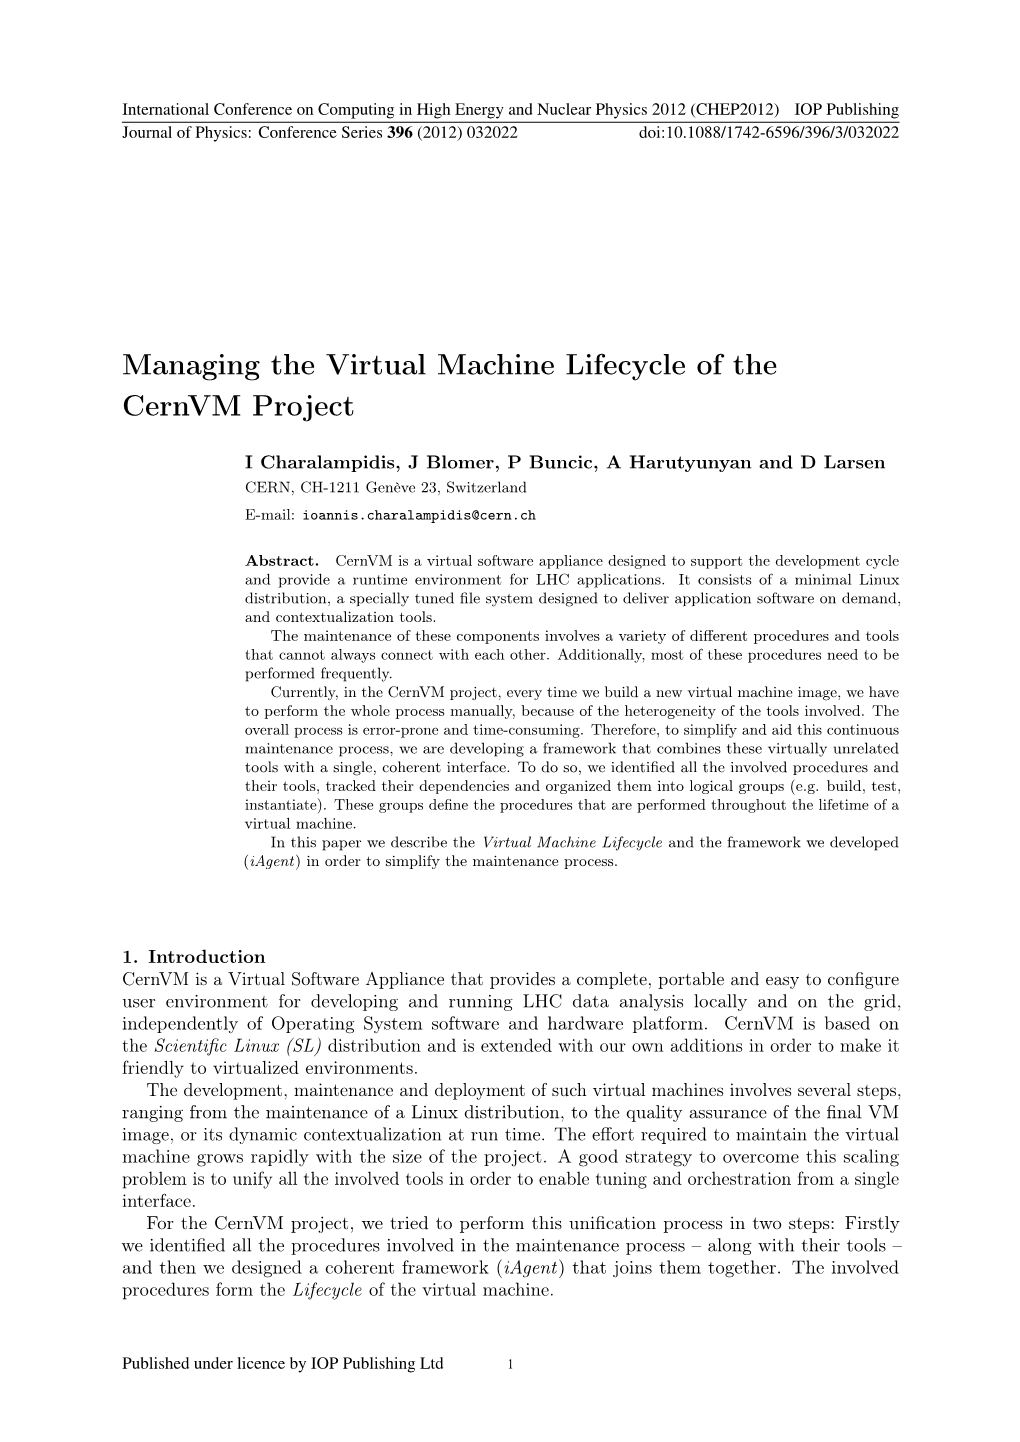 Managing the Virtual Machine Lifecycle of the Cernvm Project